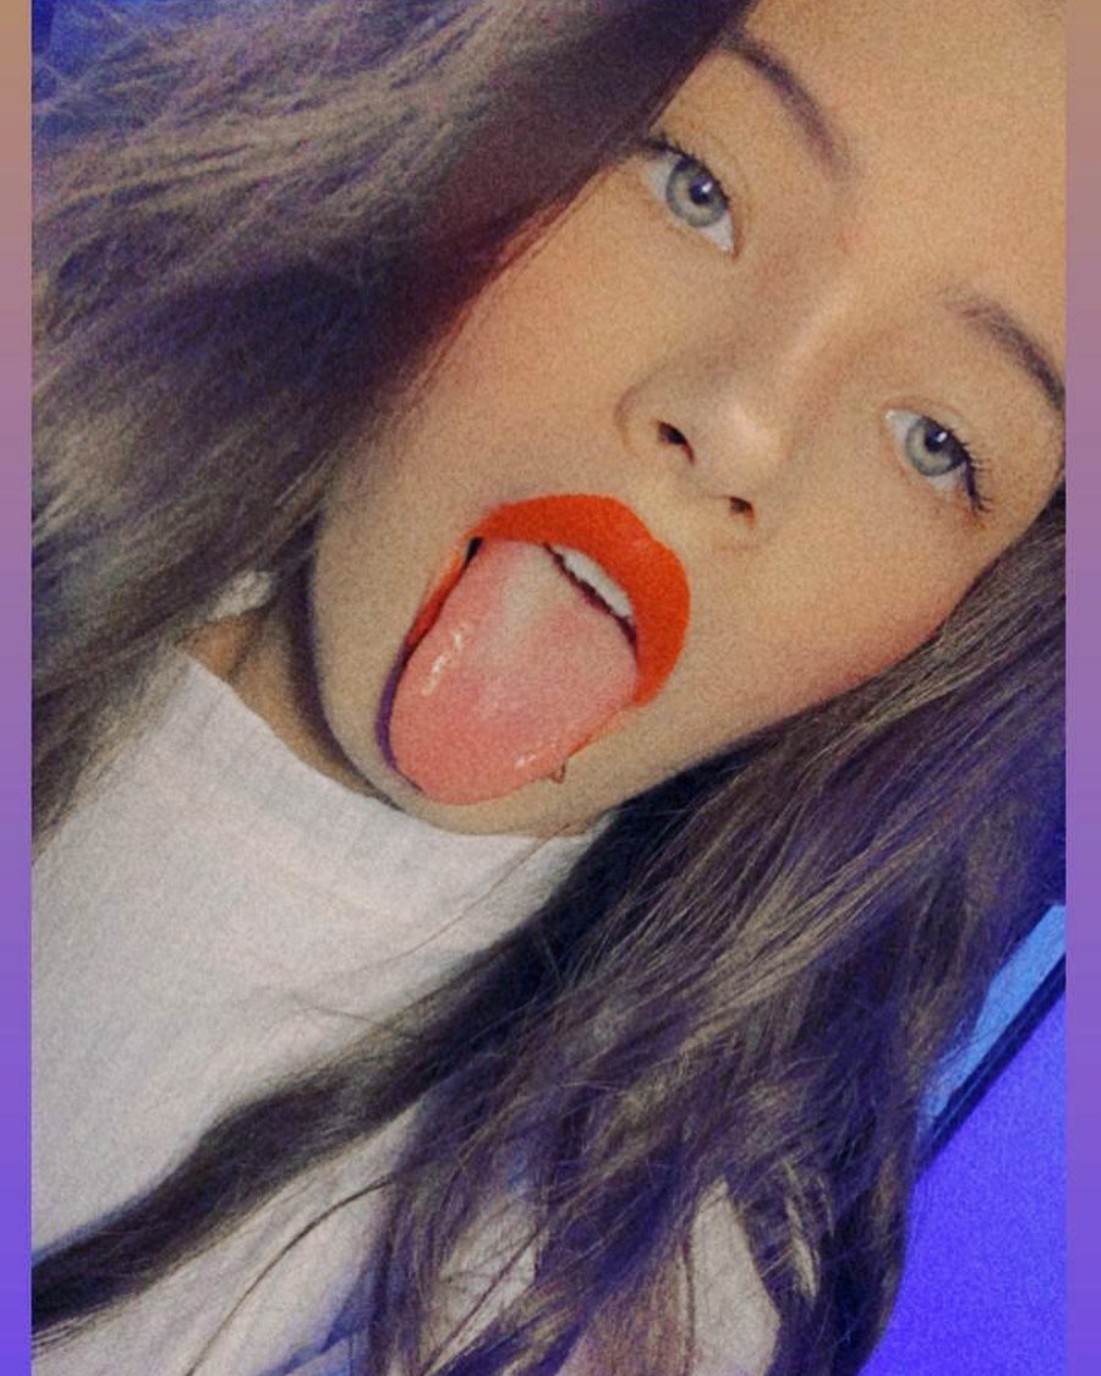 Stick your tongue out